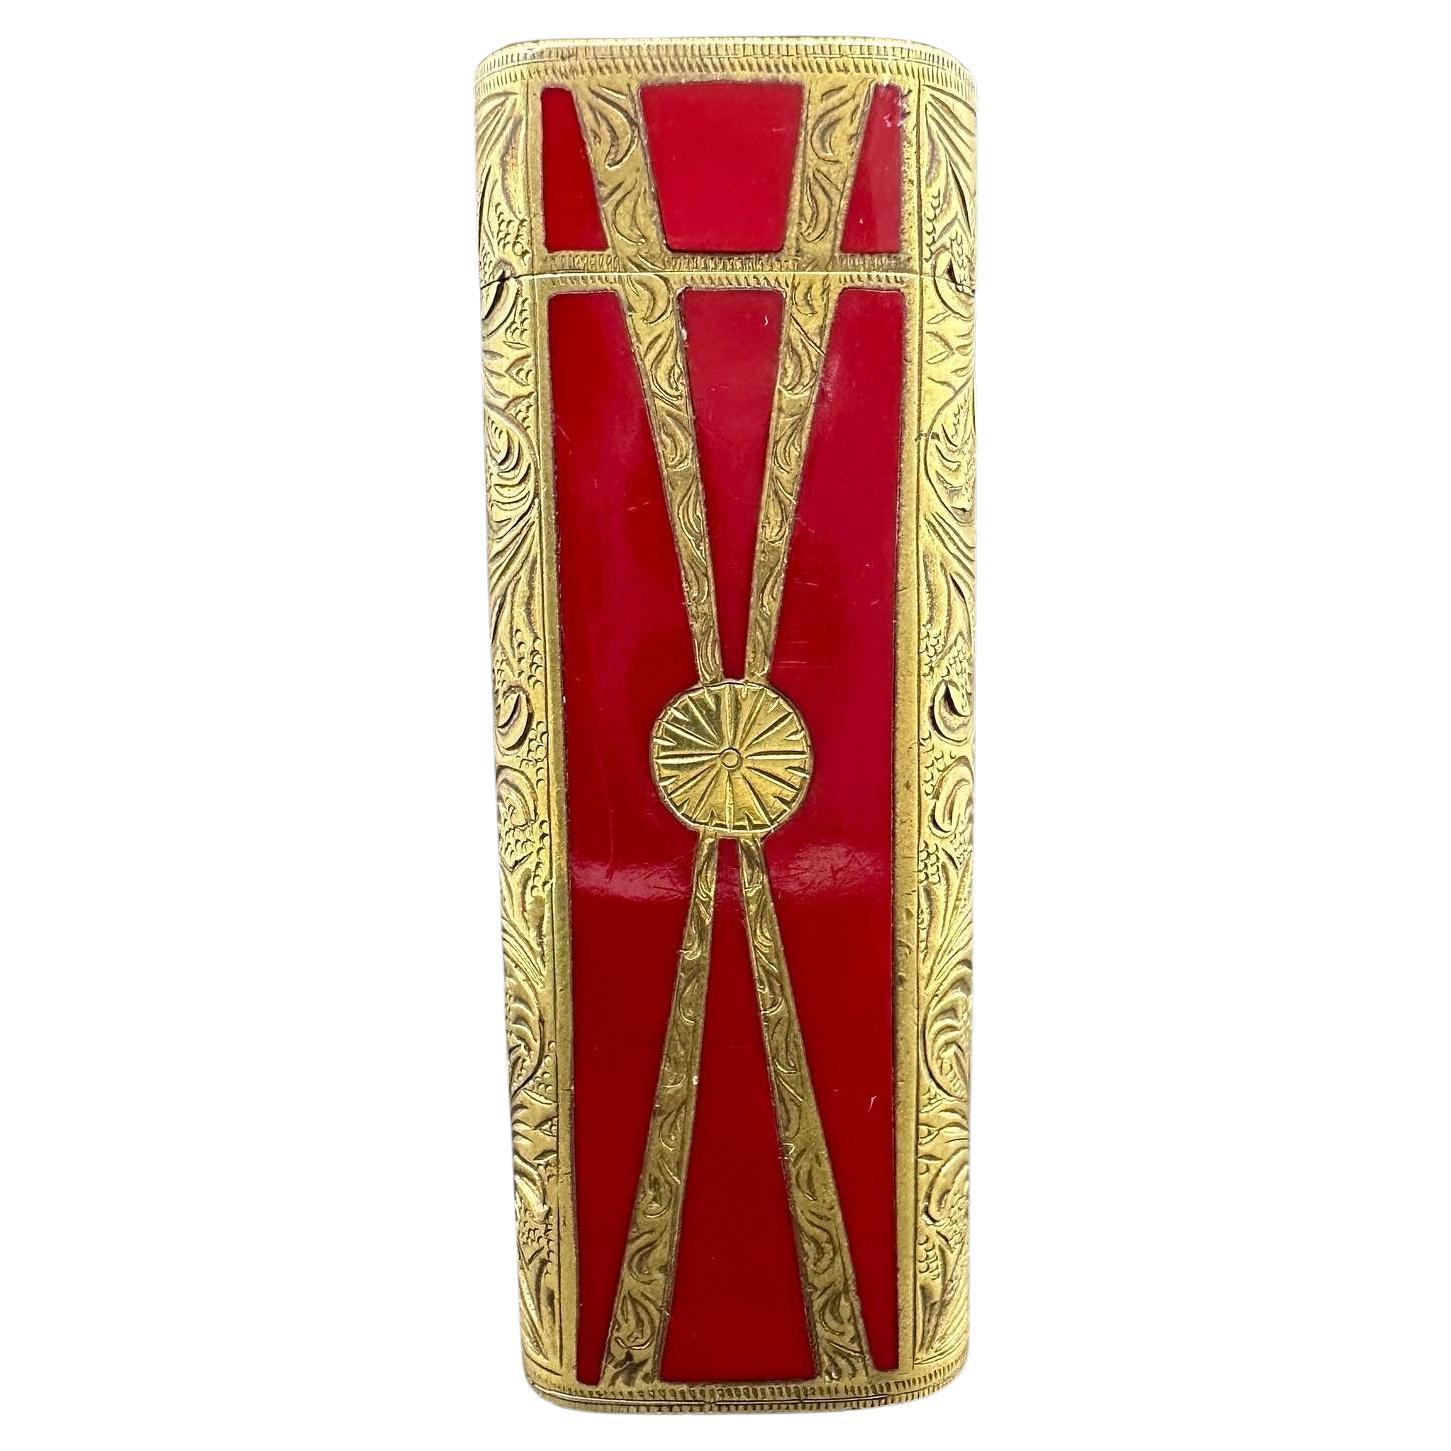 Rare Art Deco Cartier Roy King 18 K Gold & Red Lacquer Lighter. 